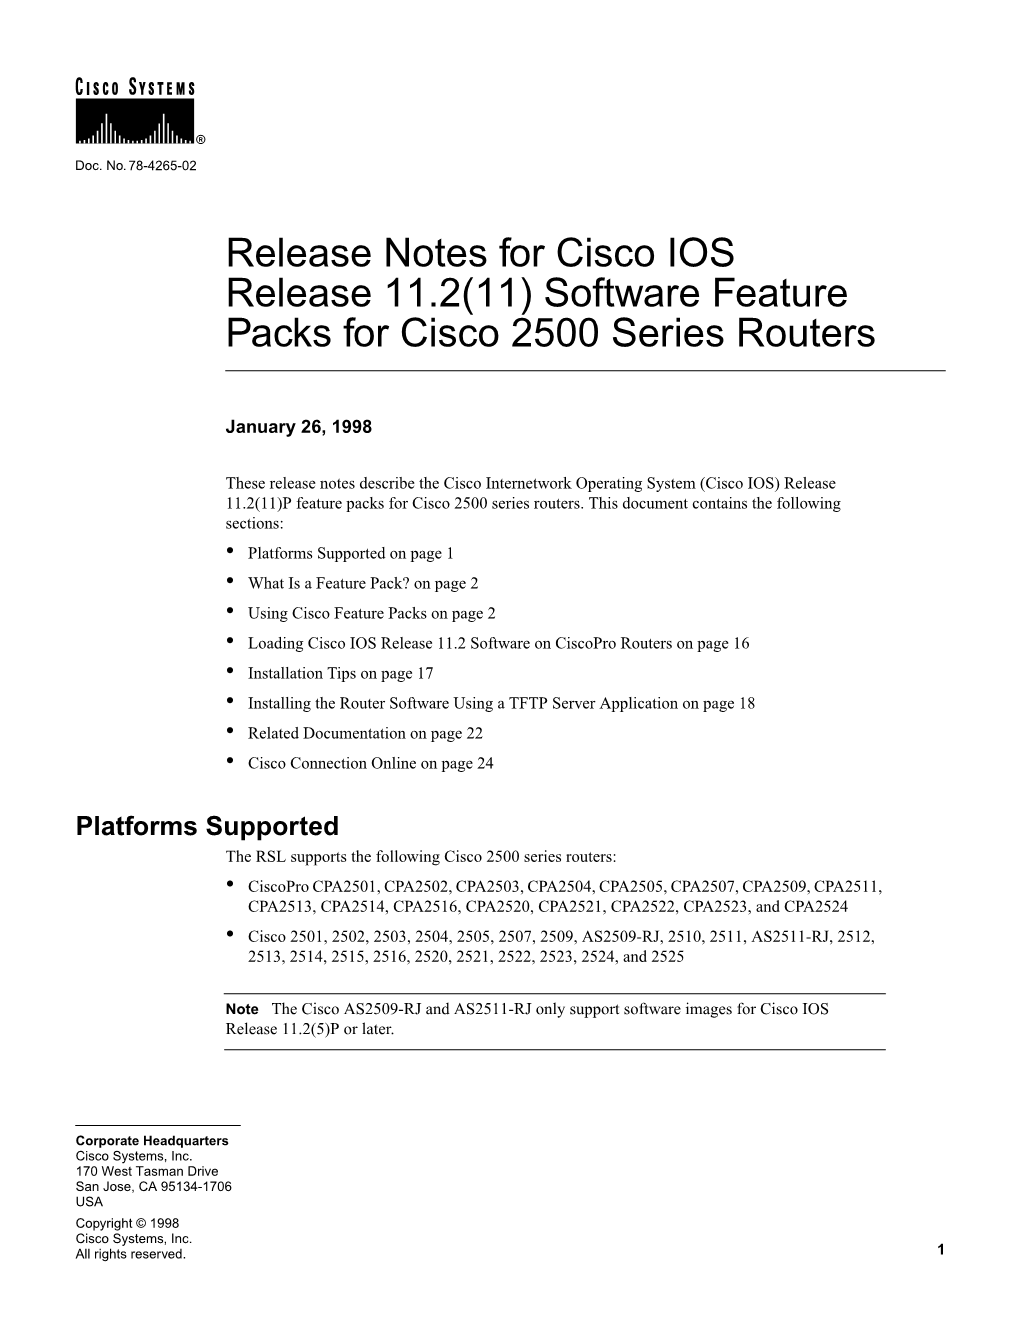 Release Notes for Cisco IOS Release 11.2(11) Software Feature Packs for Cisco 2500 Series Routers